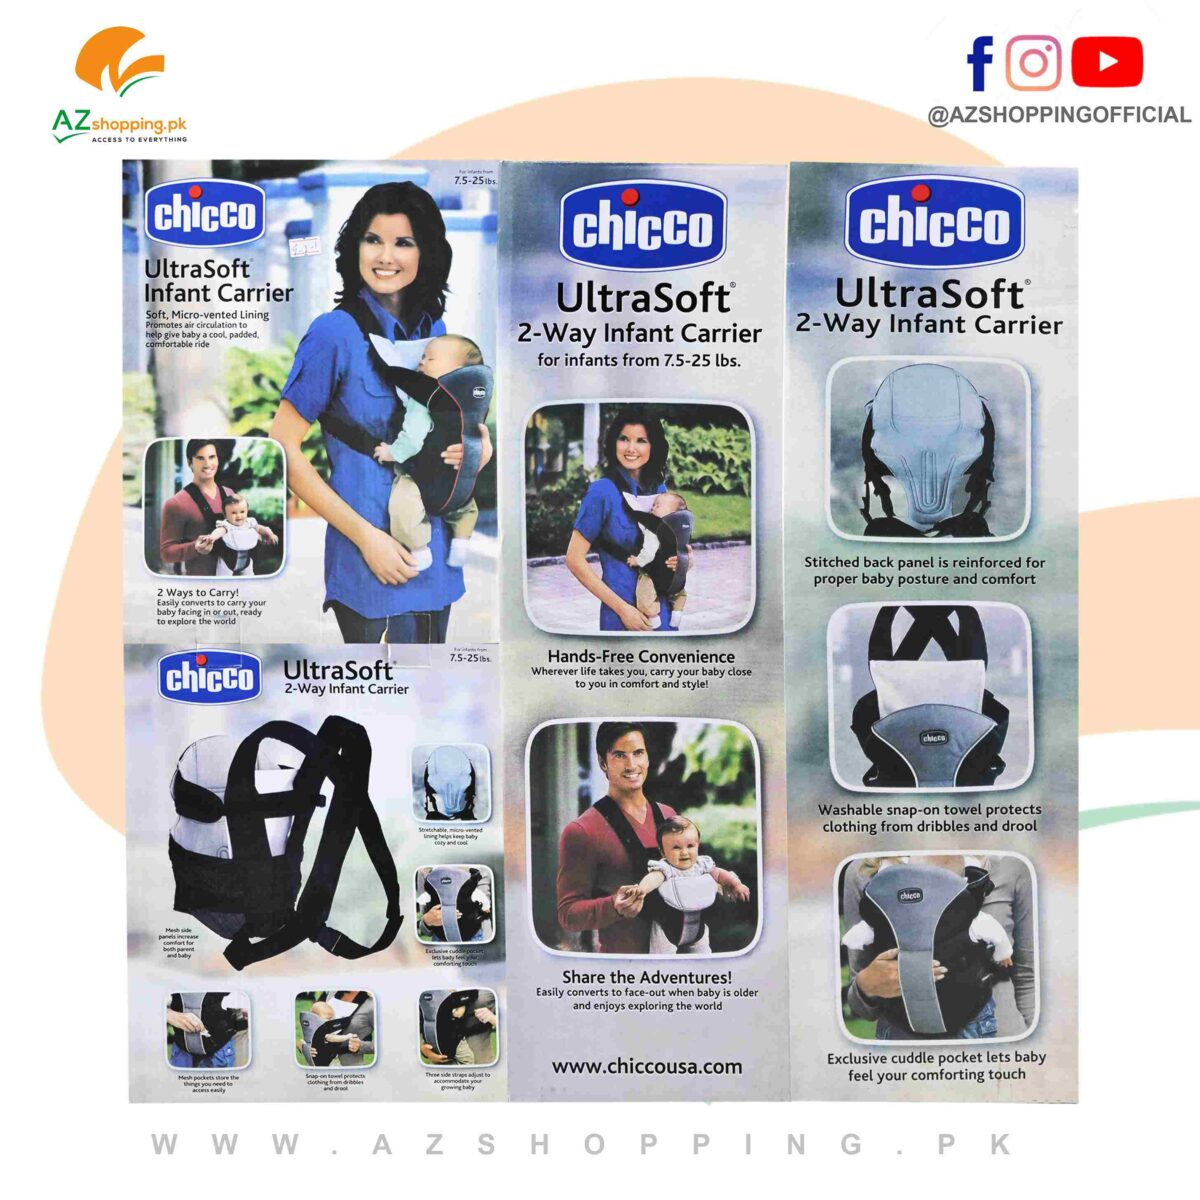 Chicco – Ultrasoft 2-Way Infant Carrier for Newborns and Infants between 7.5 to 25 Pounds, Soft, Micro-Vented Lining, Mesh Side Panels